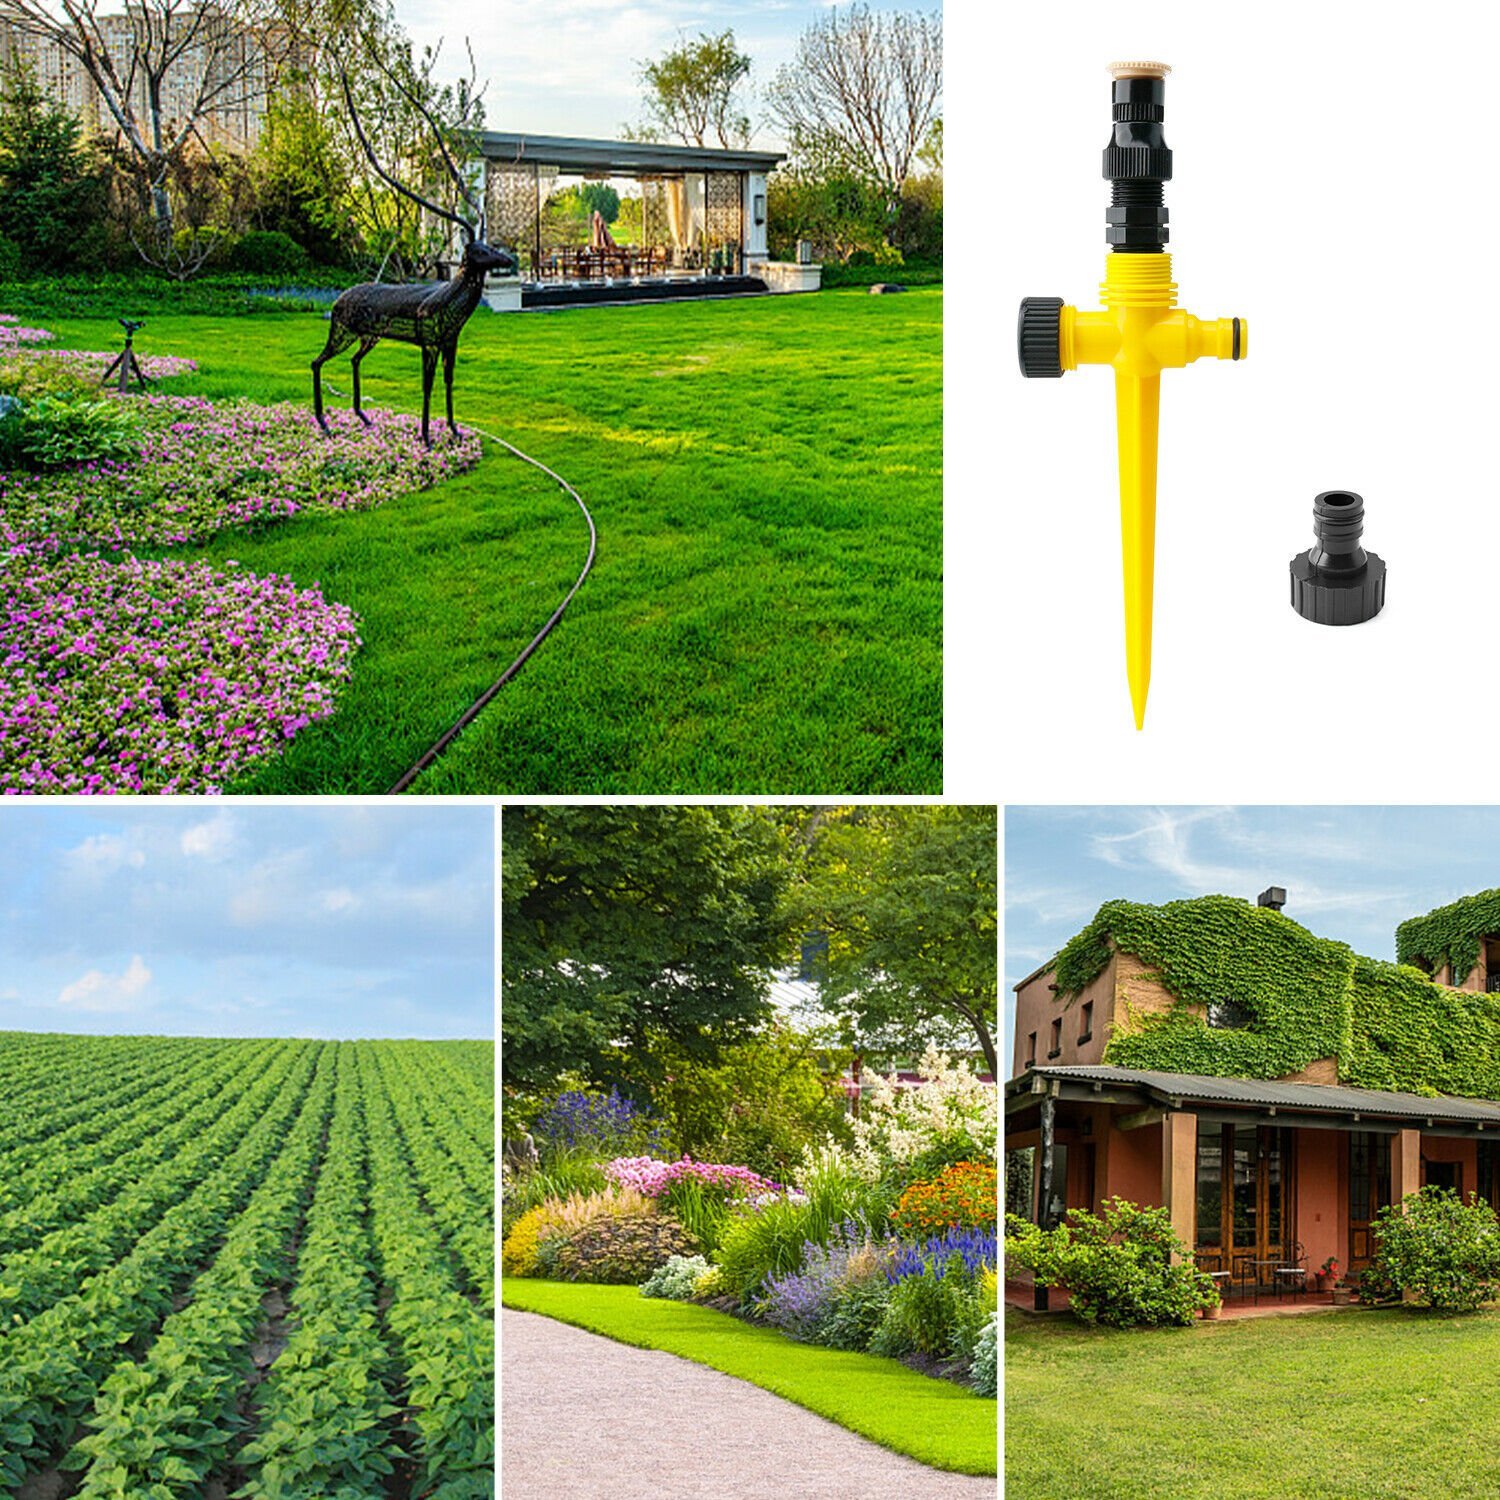 🔥(Last Day Promotion - 50% OFF) 360° Rotation Auto Irrigation System Garden Lawn Sprinkler Patio-BUY 2 GET 2 FREE